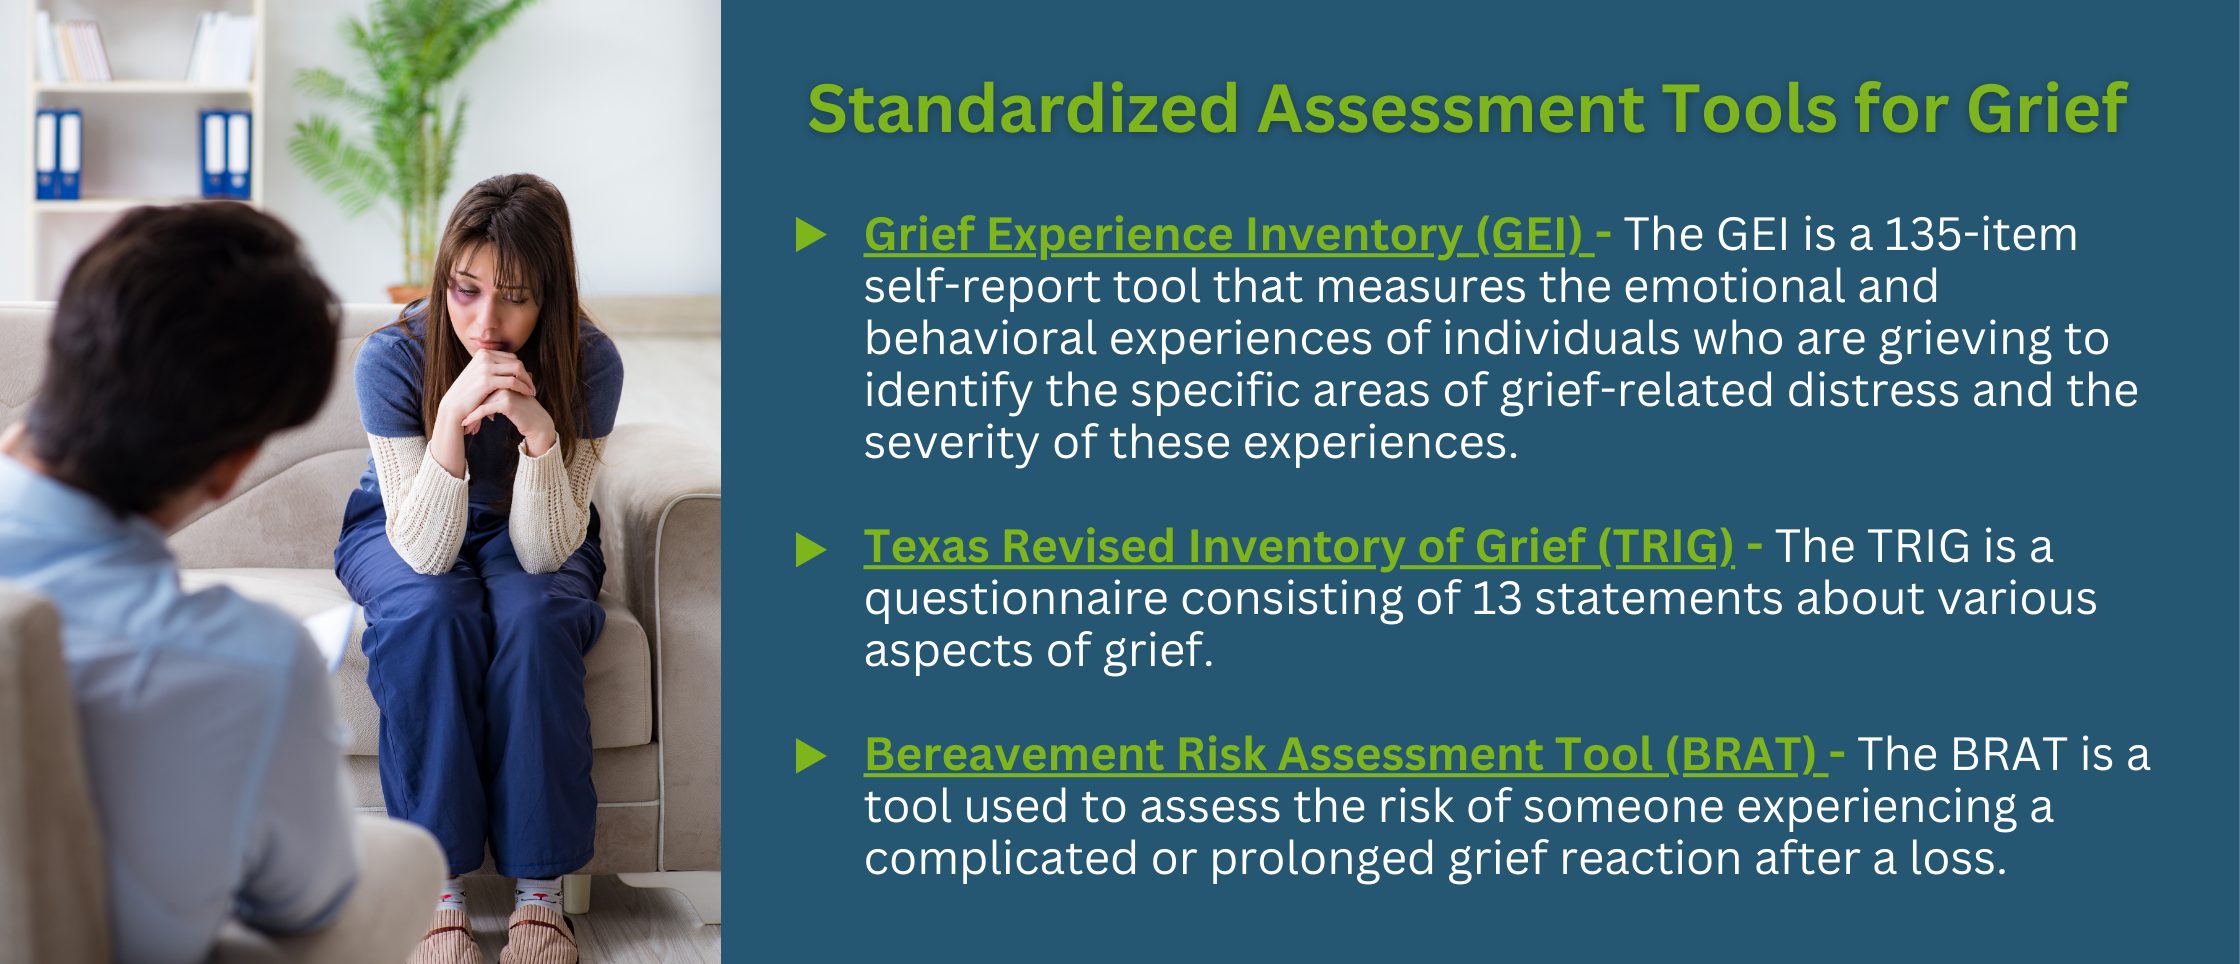 Standardized Assessment Tools for Grief